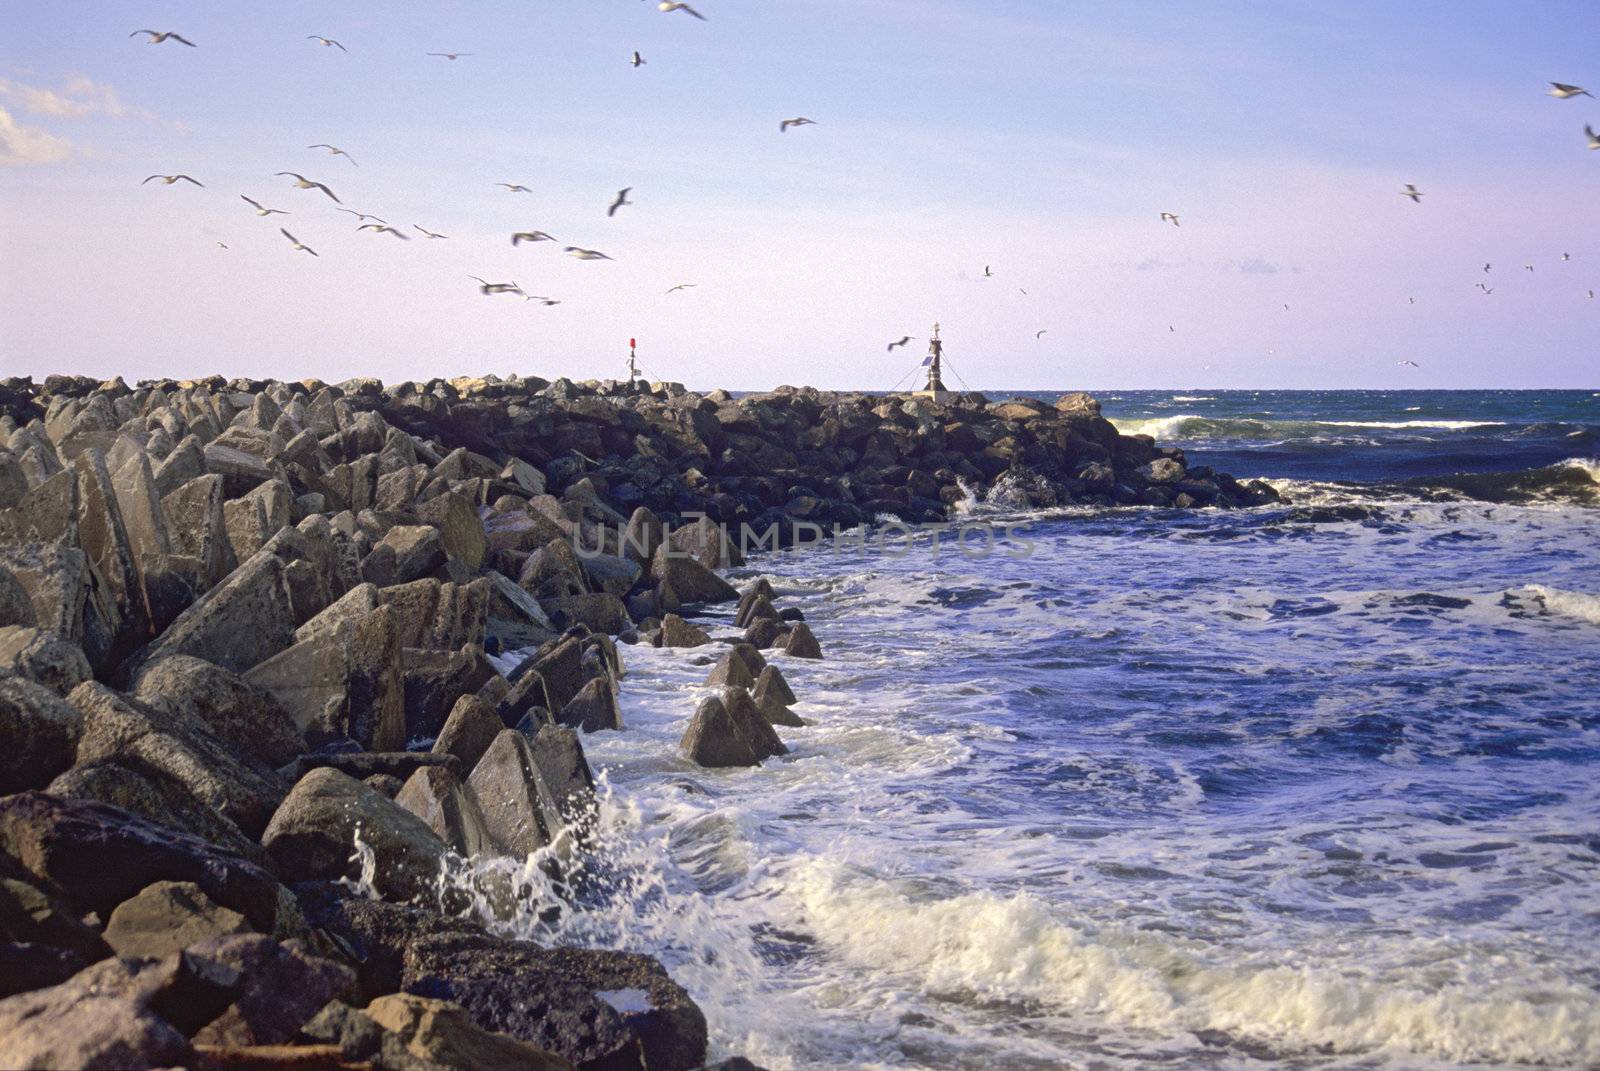 A man-made breakwater holds back the powerful Atlantic tides from eroding the Nova Scotia coastline.